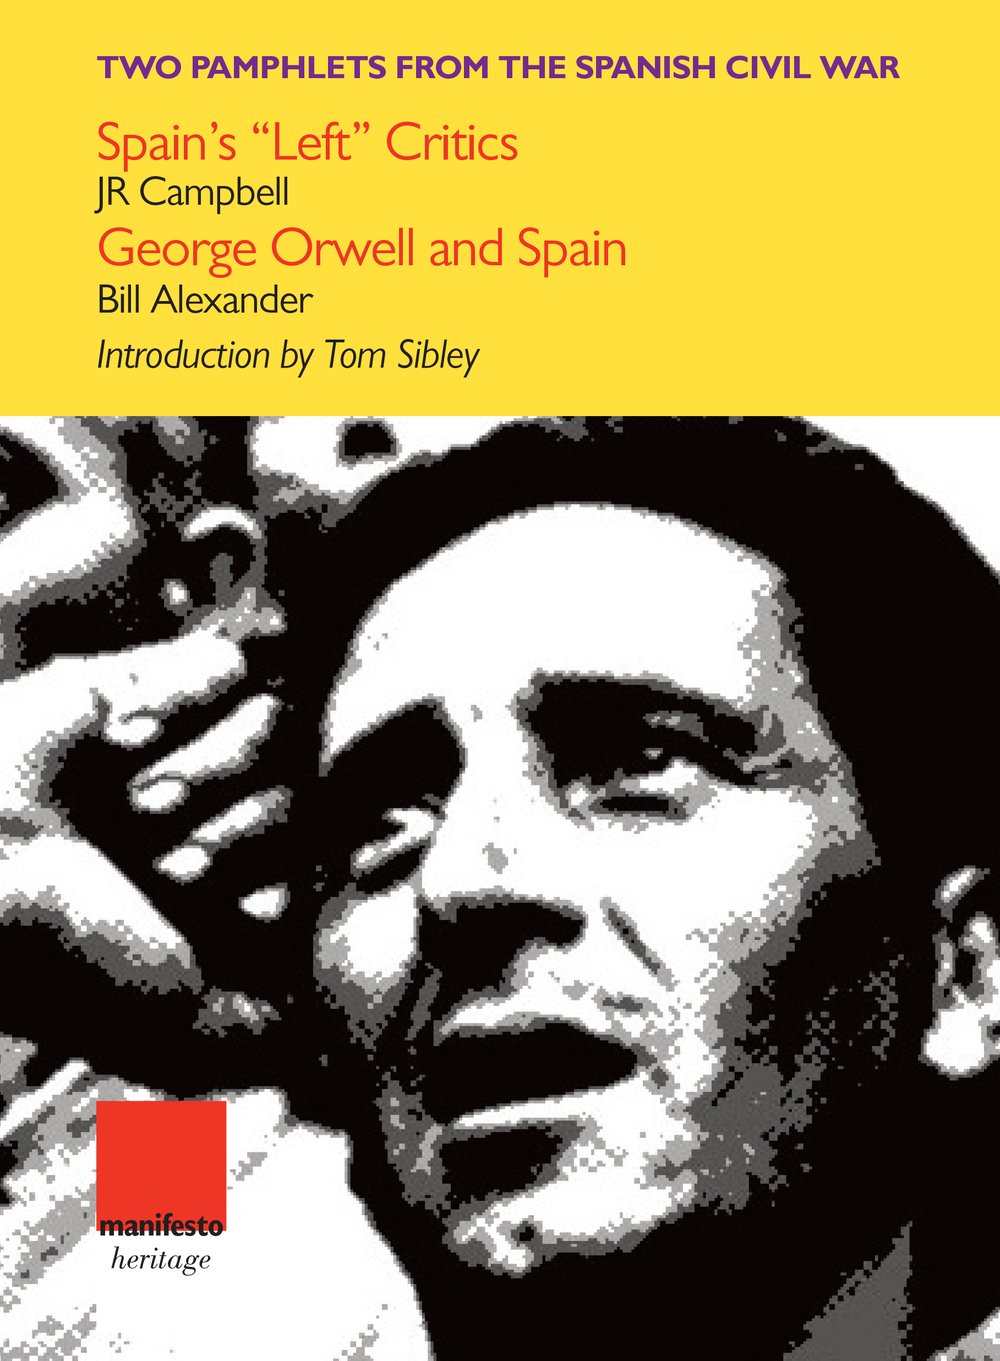 Two pamphlets from the Spanish Civil War with an introduction by Tom Sibley